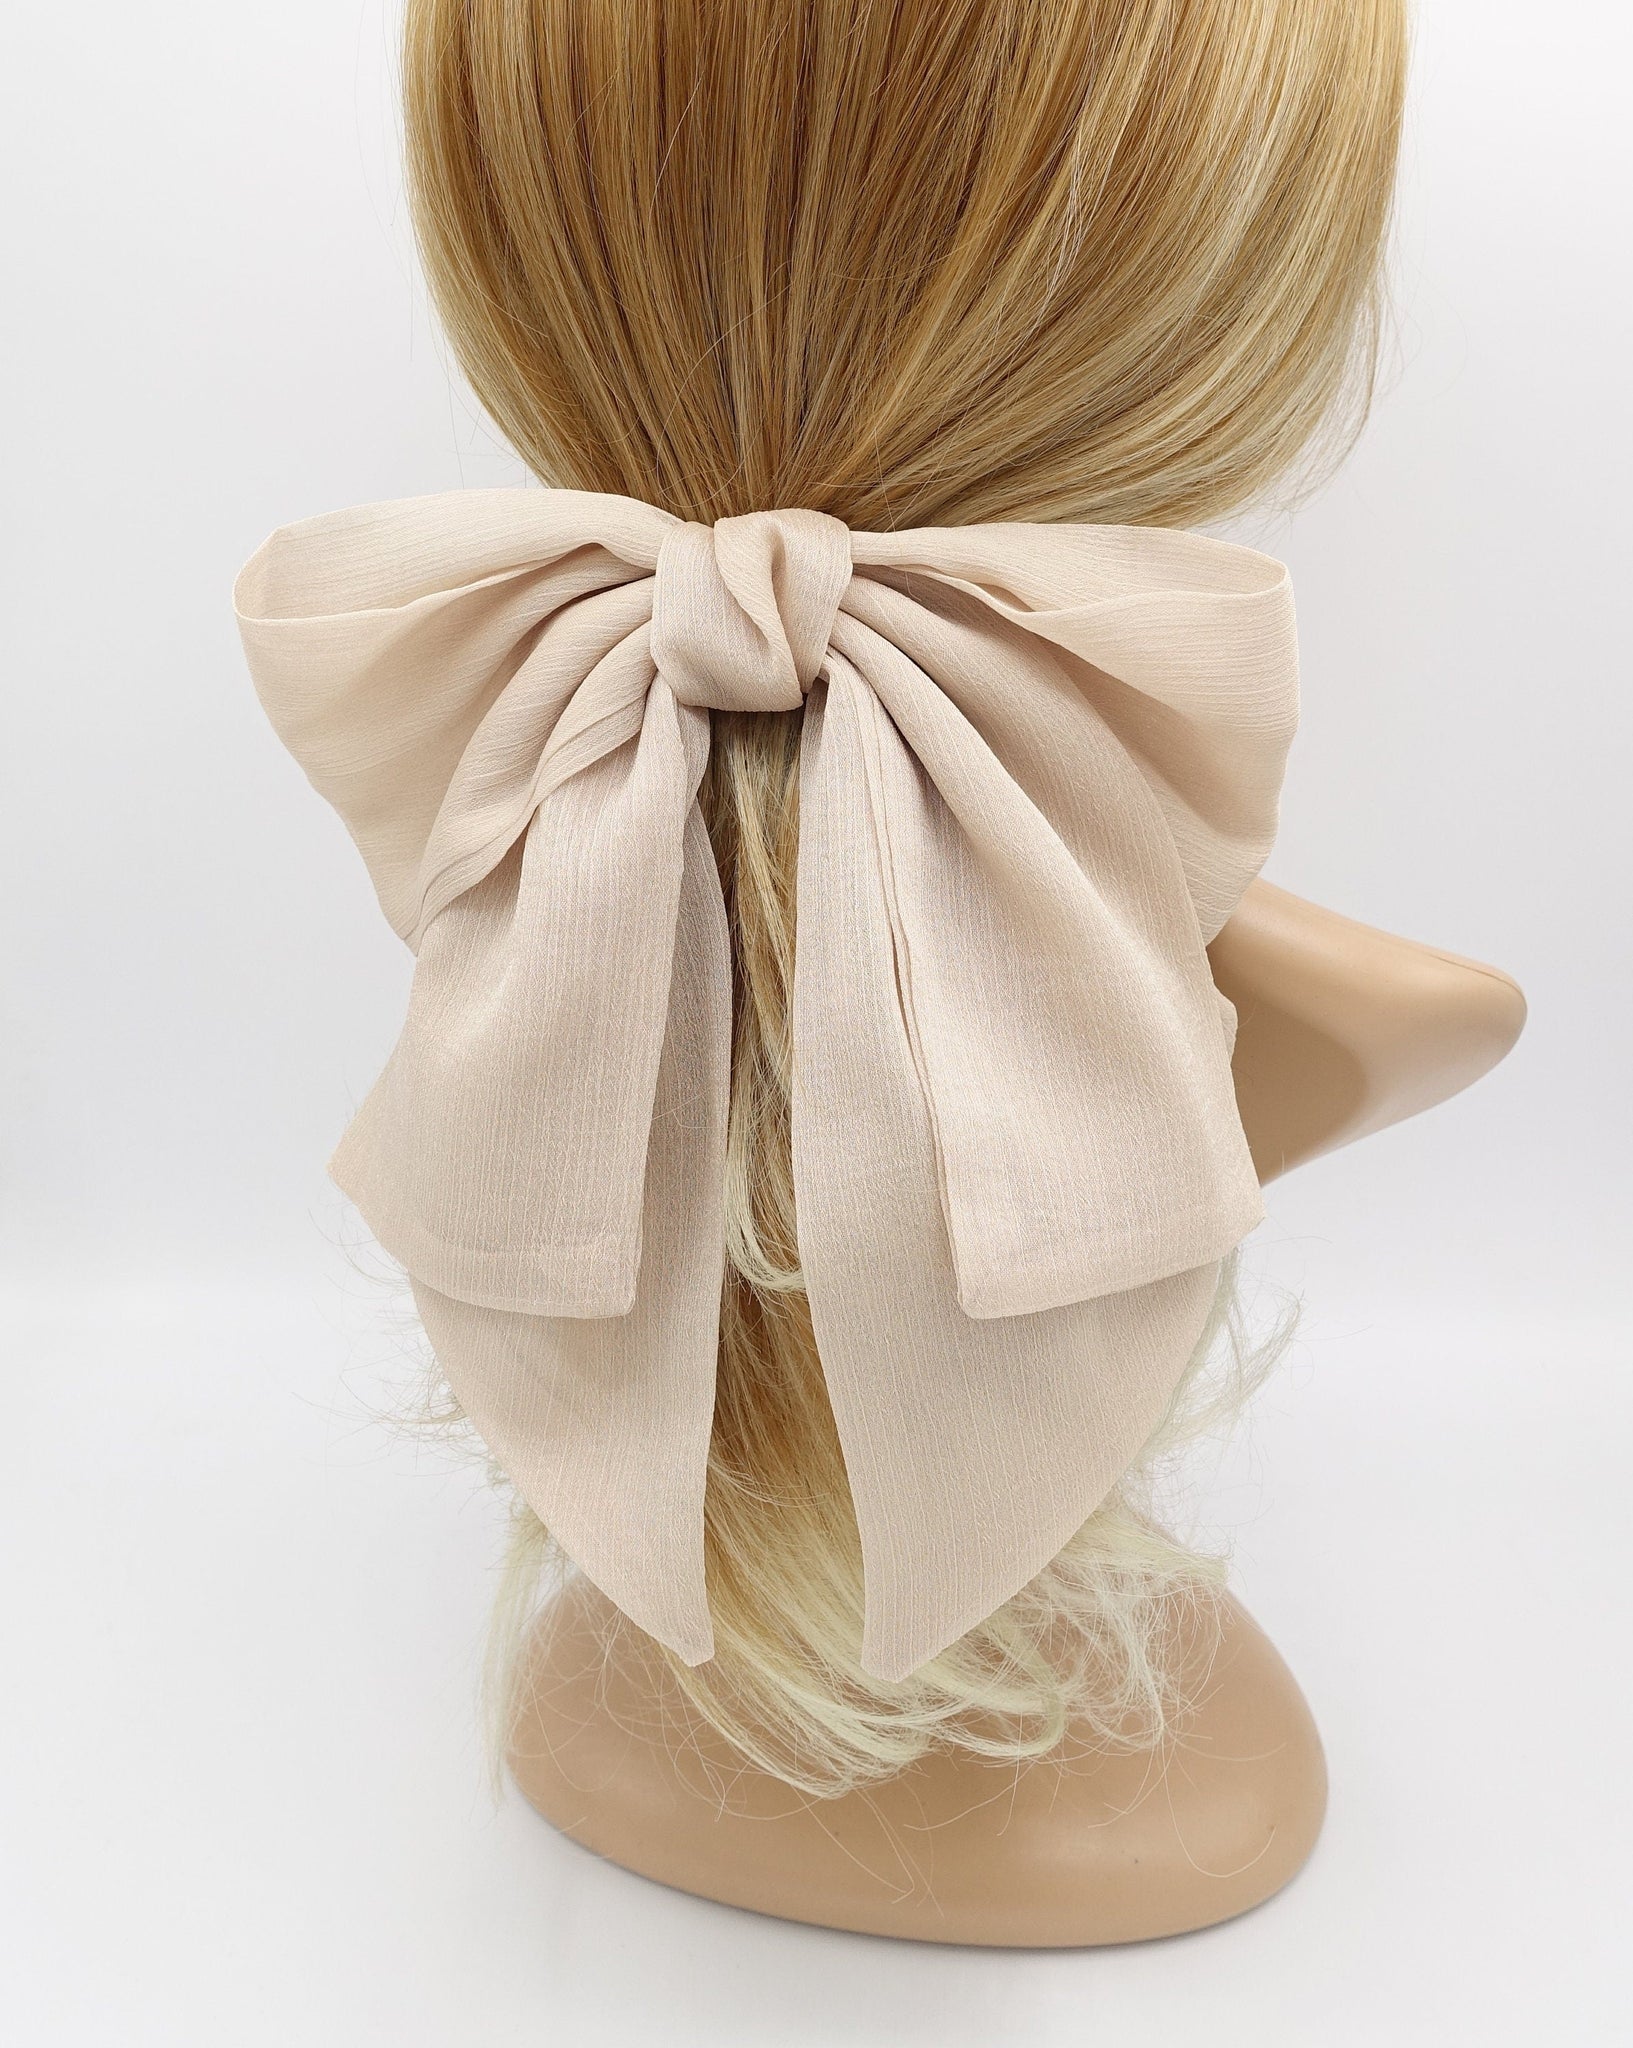 VeryShine Beige chiffon 2 tails hair bow large hair accessory for women